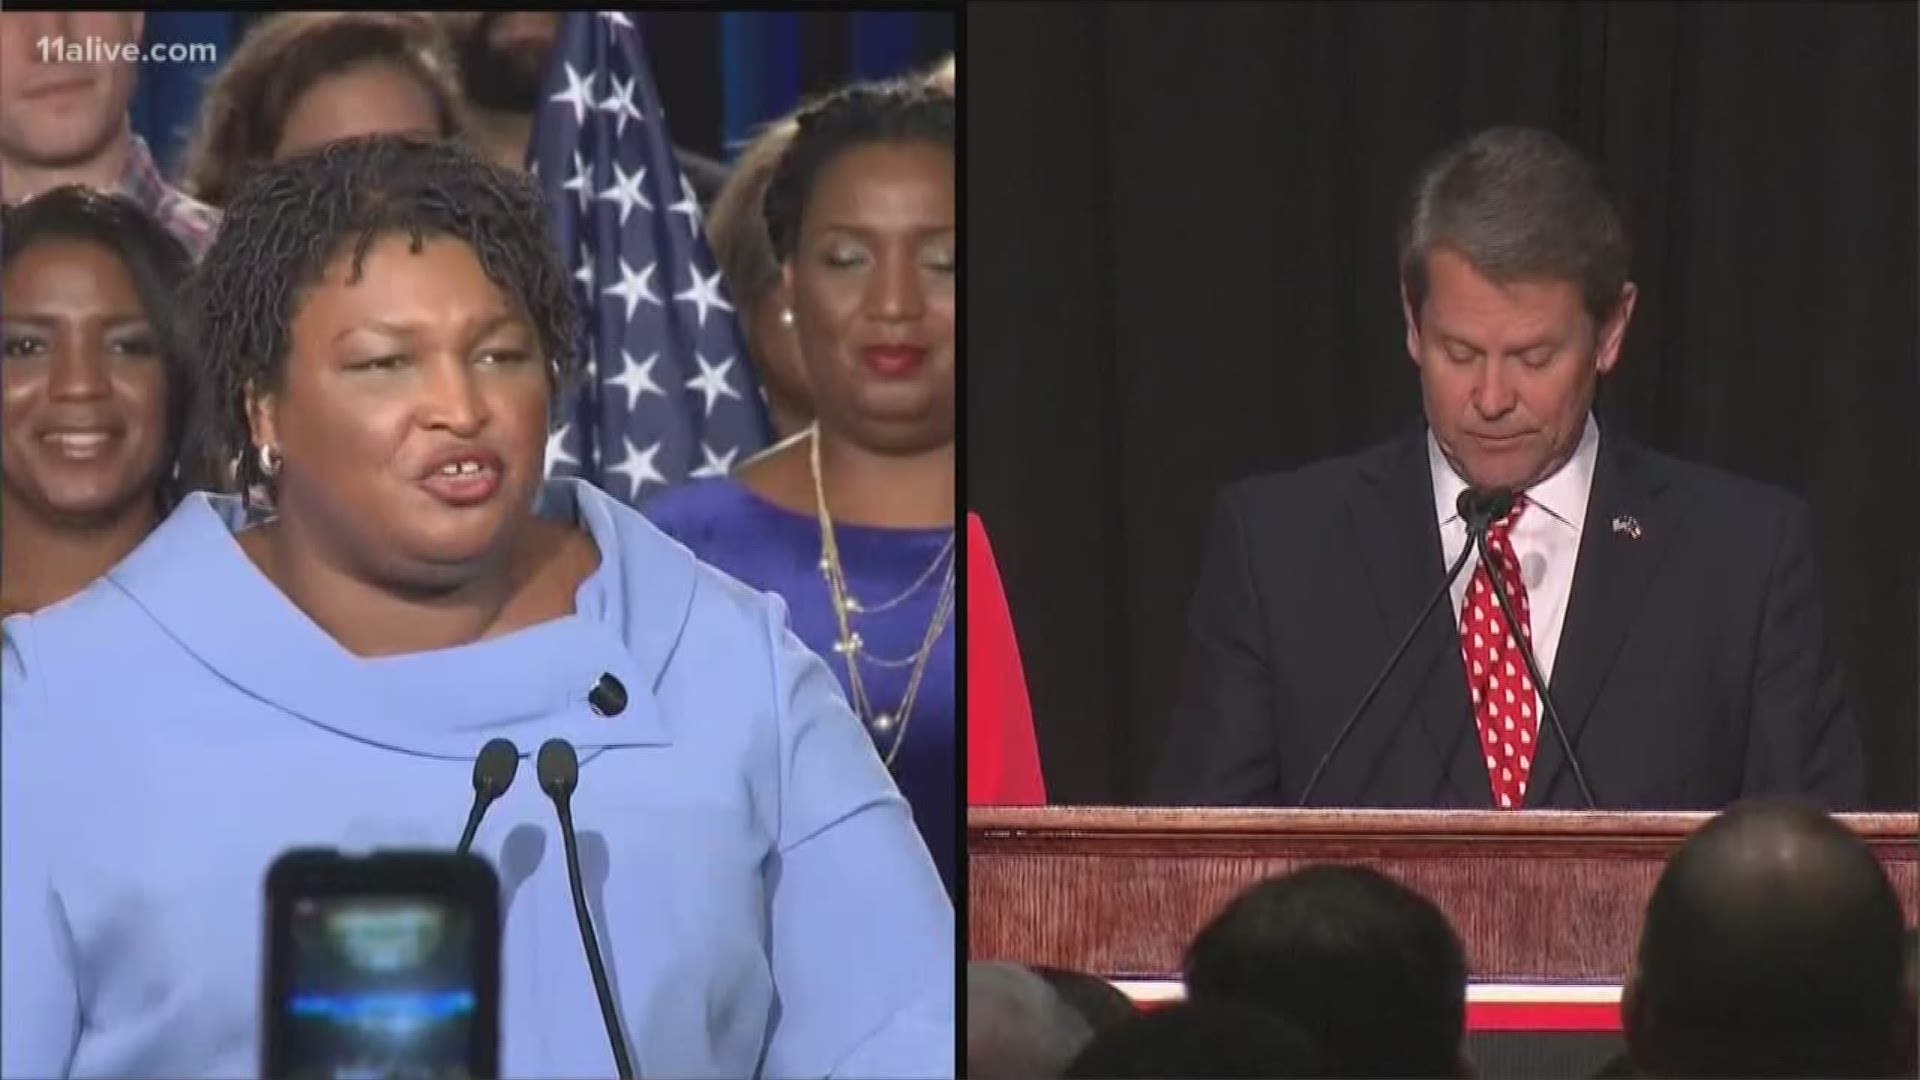 The race may be over, but it didn't come to a close in the traditional way. Abrams gave a fiery speech as she conceded - and President Donald Trump has weighed in as well.